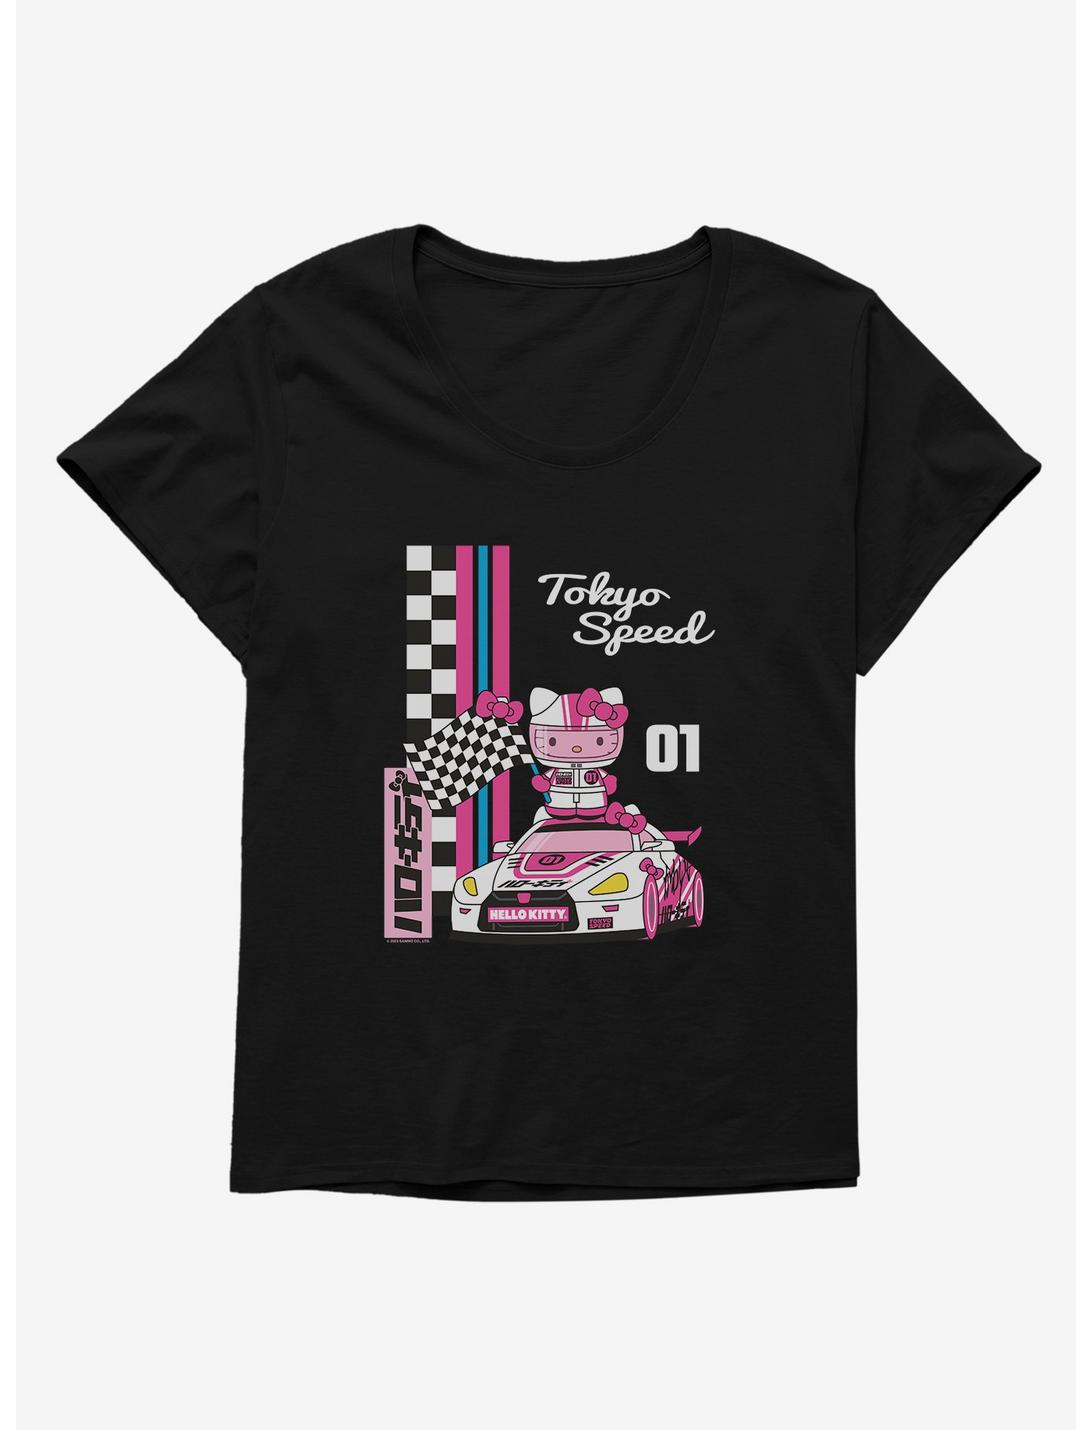 Hello Kitty And Friends Checkered Flag Tokyo Speed Womens T-Shirt Plus Size, BLACK, hi-res